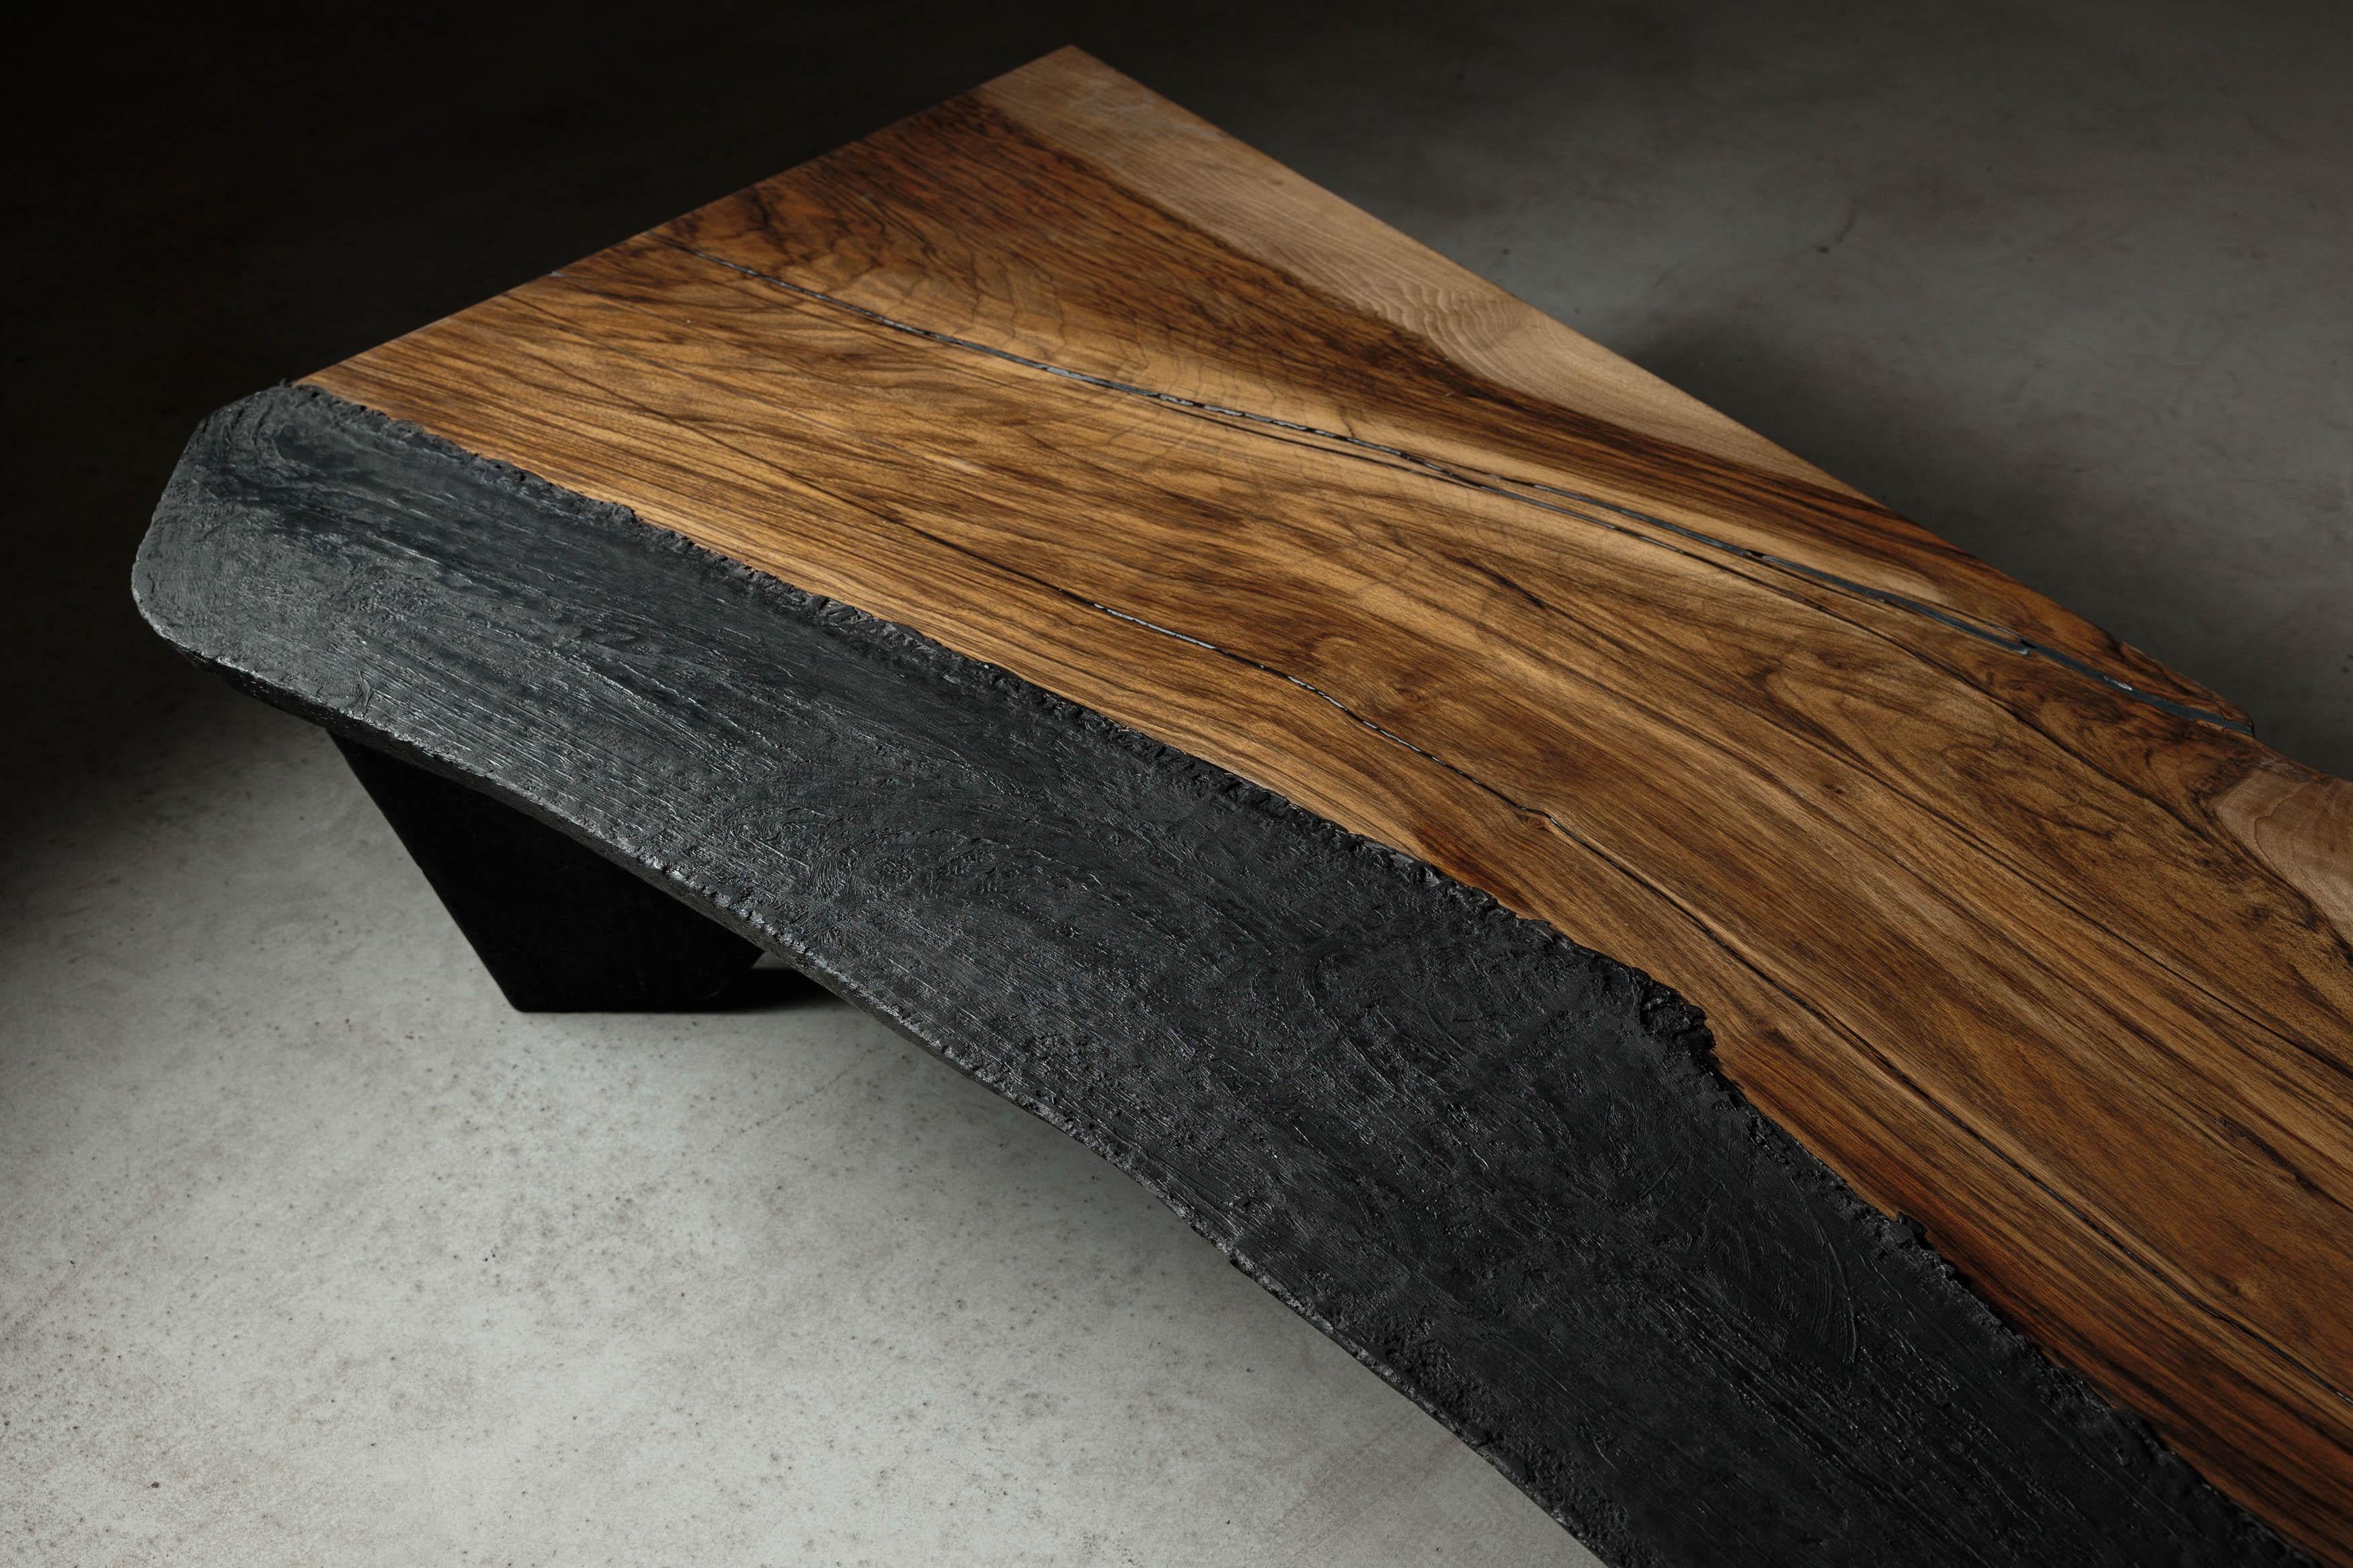 Blackened Contemporary Walnut Brutalist Coffee Table by Eero Moss - EM106 For Sale